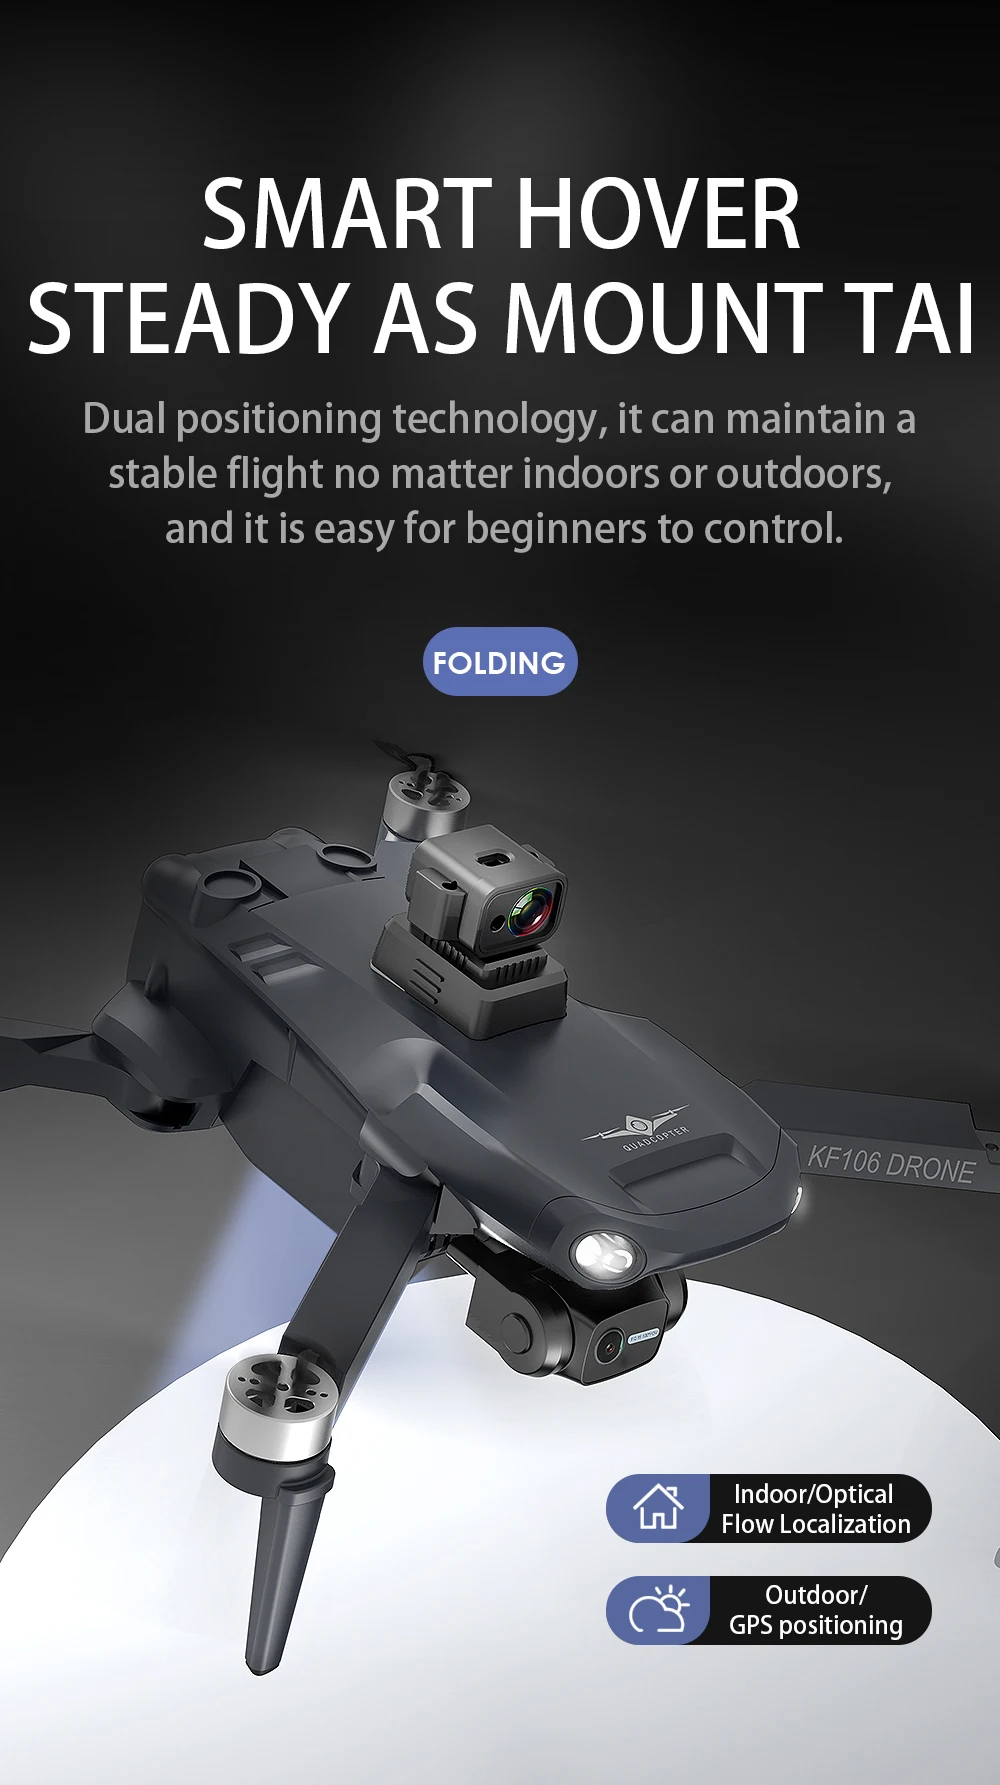 KFPLAN KF106 Drone, SMART HOVER STEADY AS MOUNT TAI Dual positioning technology, it can